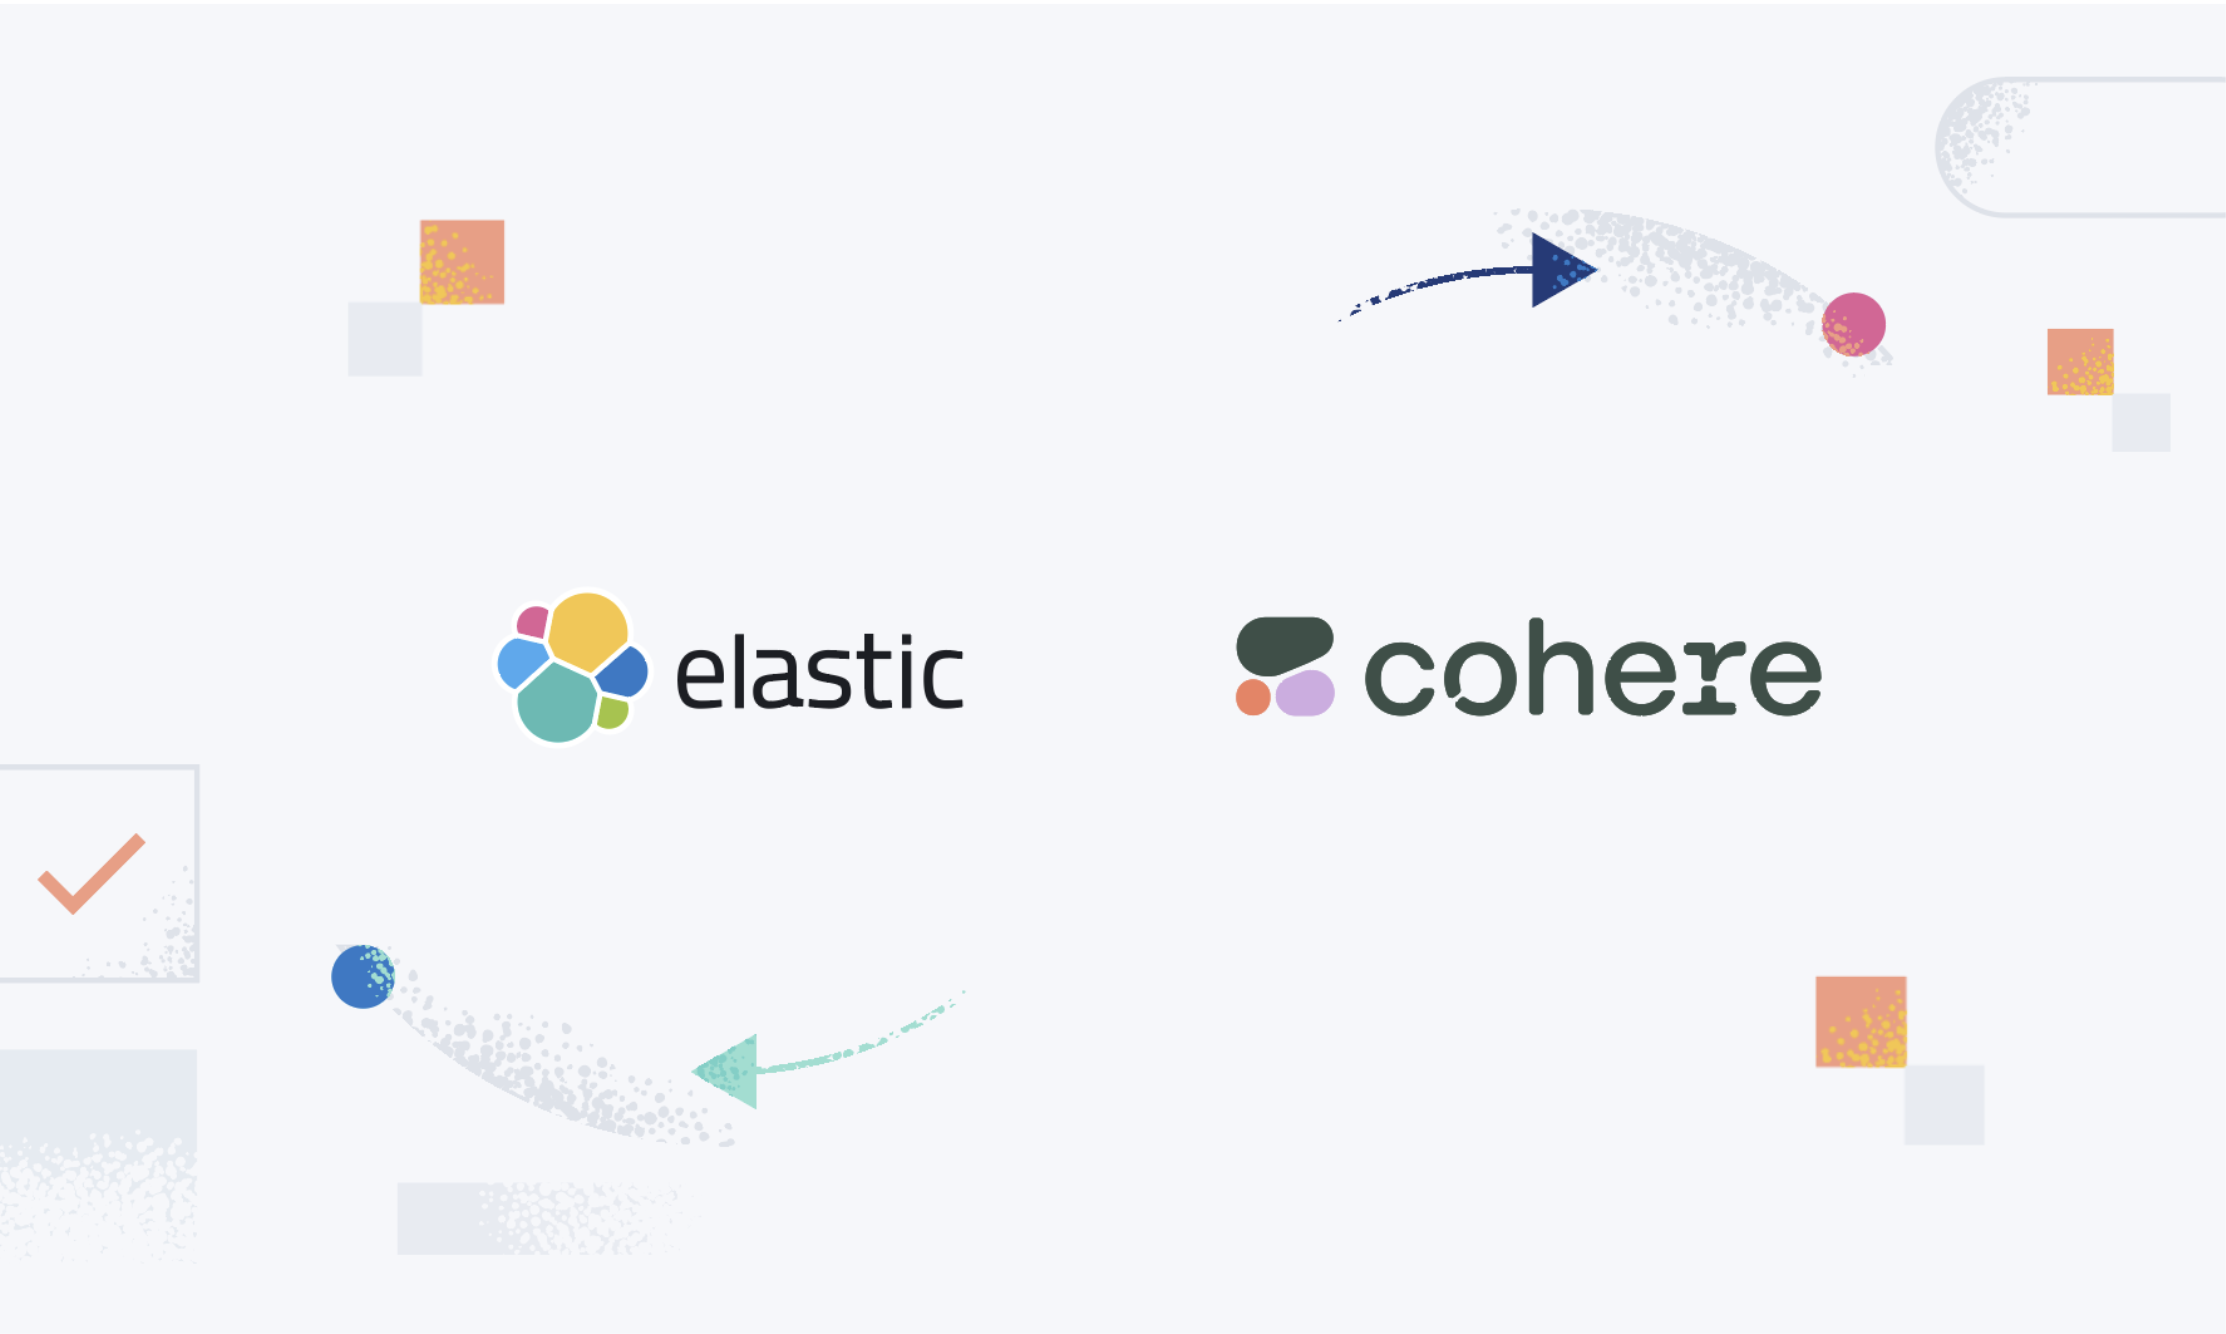 Elasticsearch open Inference API adds support for Cohere’s Rerank 3 model